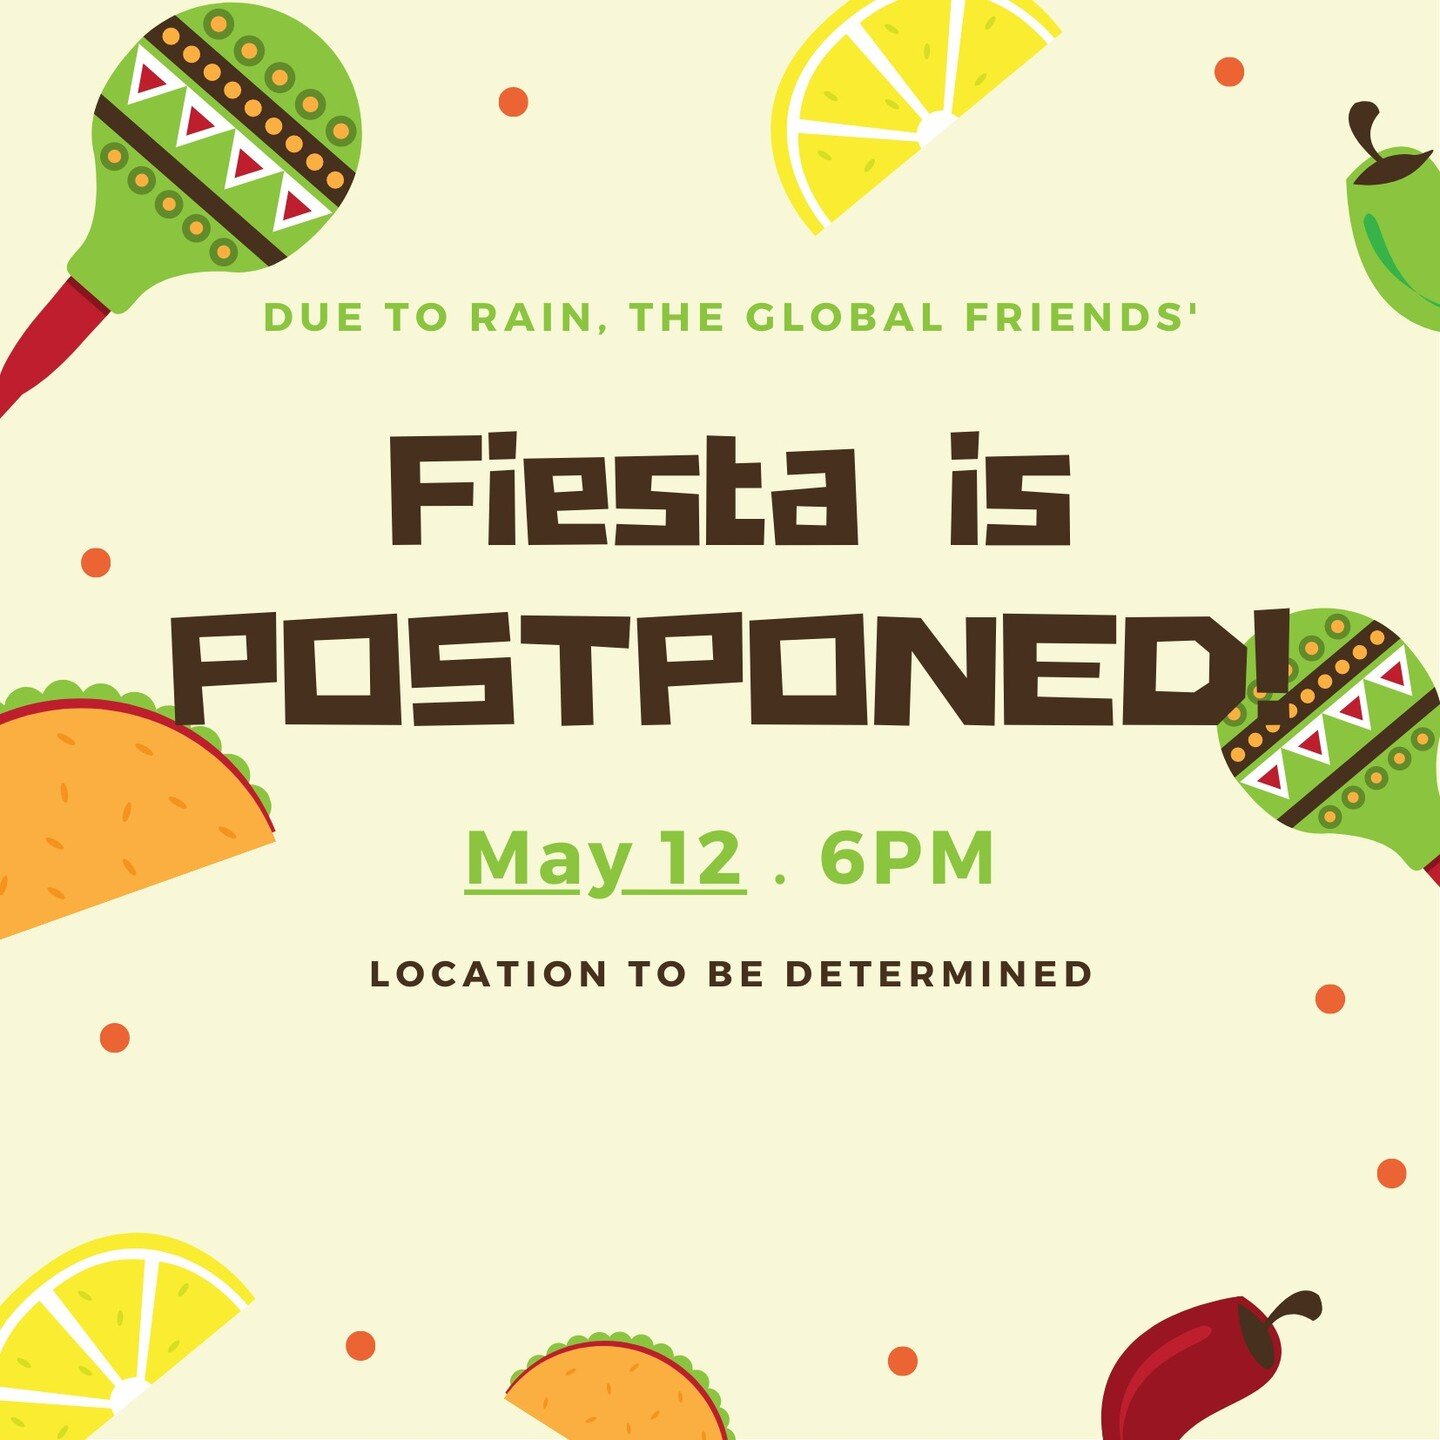 ❗PSA: Our End of the Year Party has been postponed to NEXT FRIDAY❗

We are sad to wait, but let the anticipation lead to a sweeter celebration! More details on the location is to come. 

Stay cozy &amp; safe! Happy Cinco de Mayo🎊